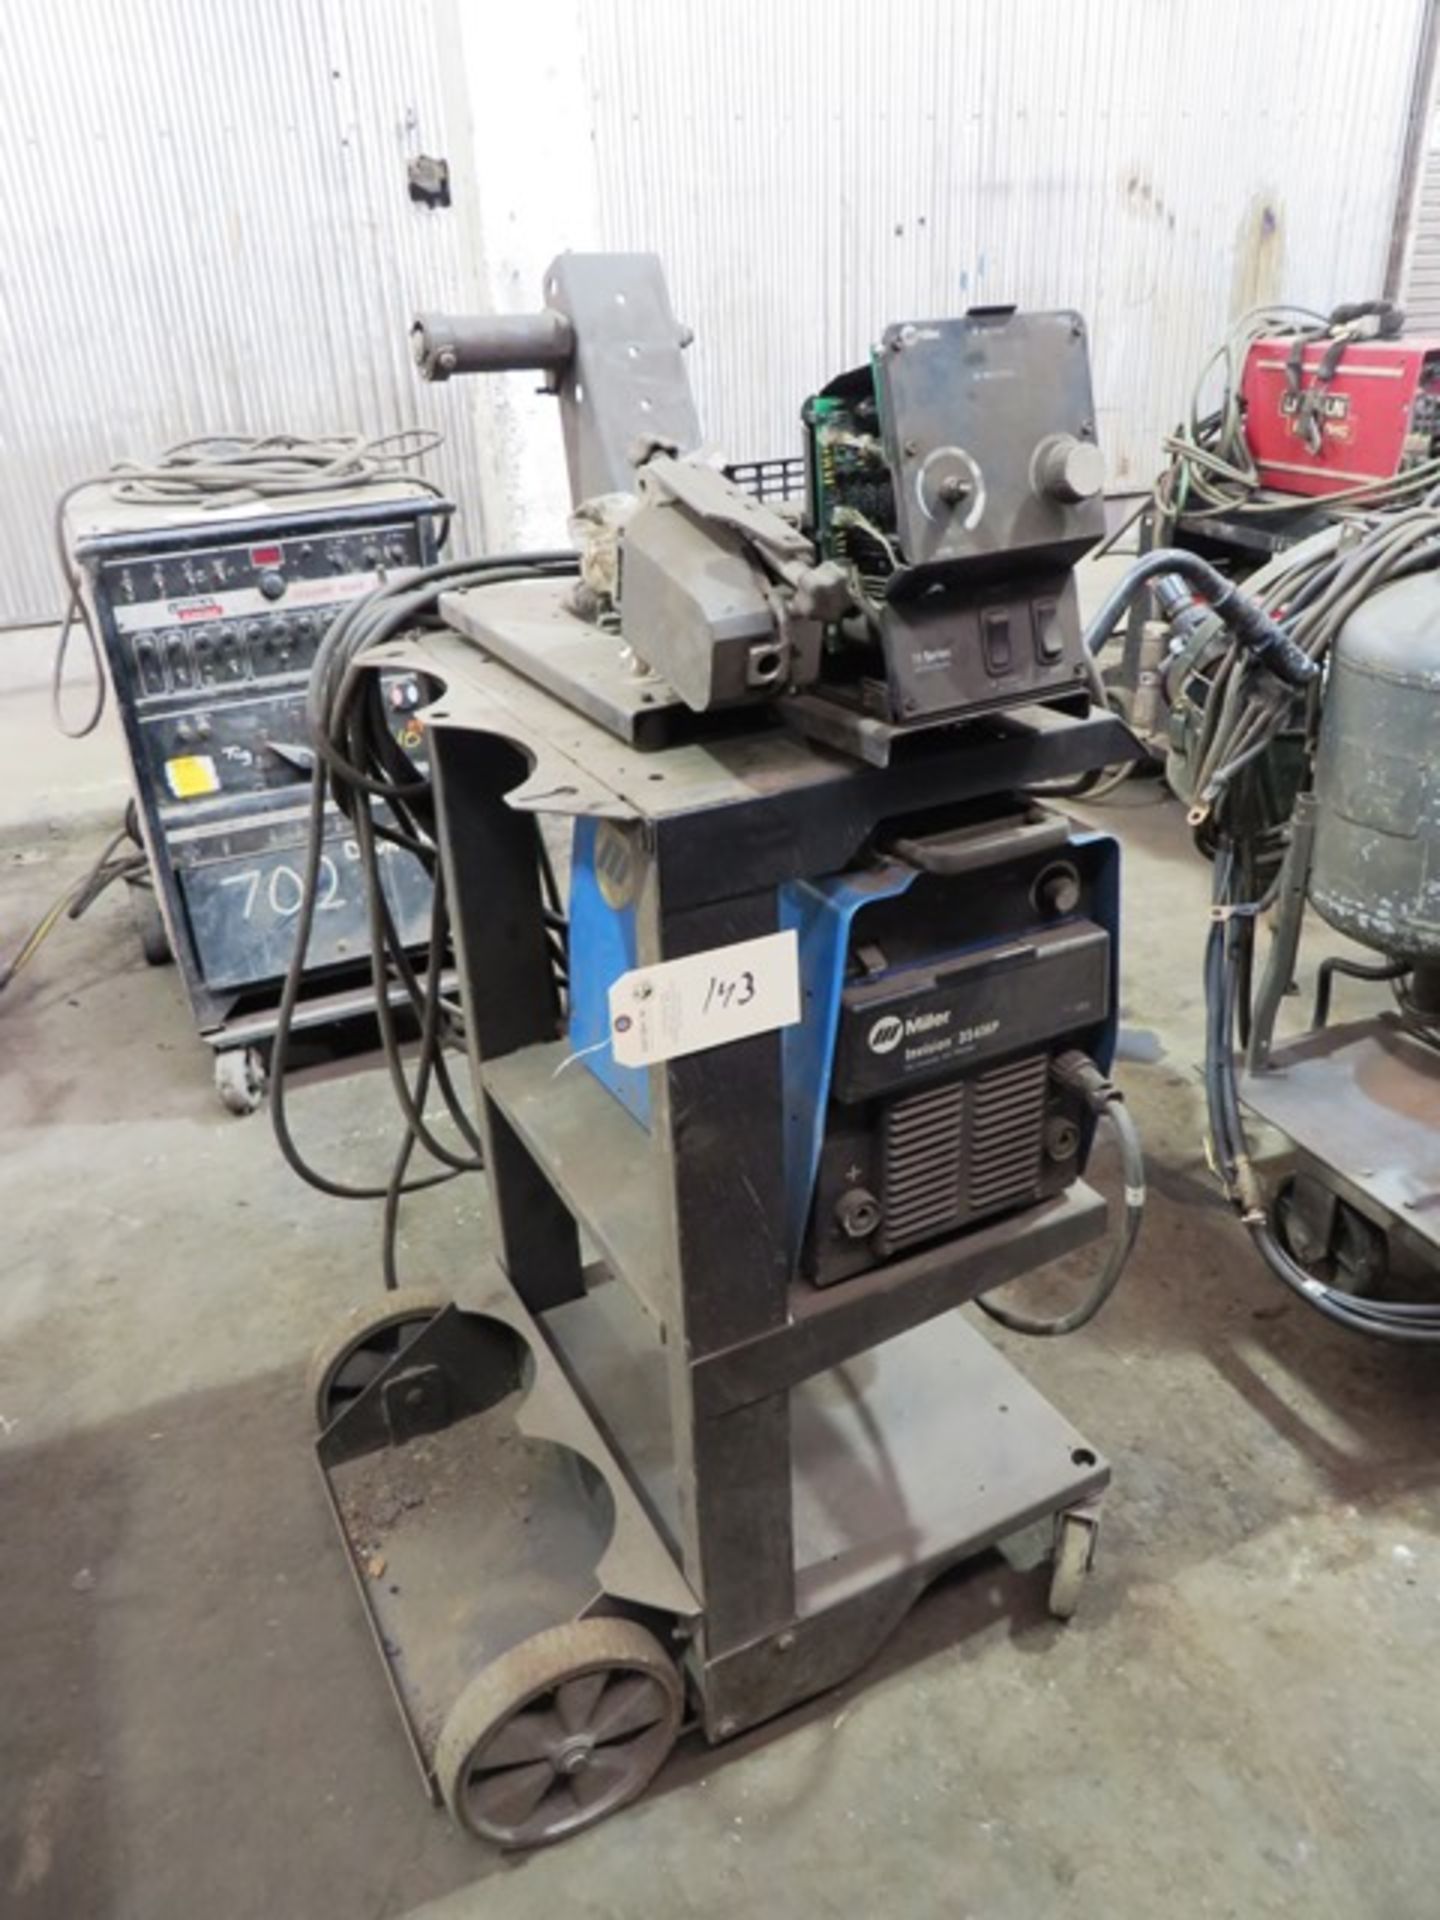 Miller Invision 354 MP Mig Welder with 70 Series Wire Feed (Needs Repair)